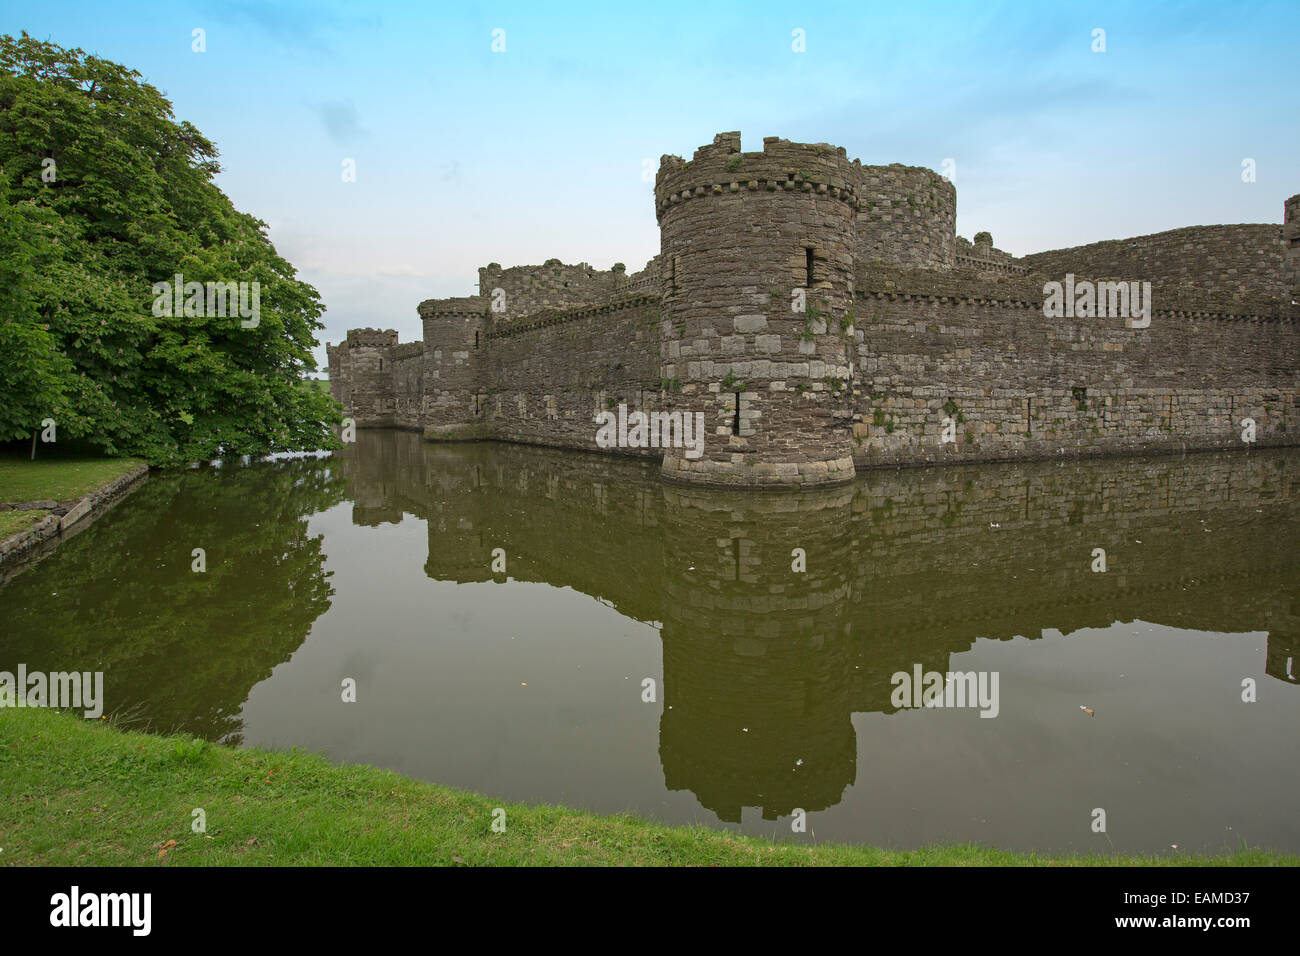 Spectacular 13th century Beaumaris castle  with high walls & towers reflected in calm water of moat under blue sky in Wales Stock Photo